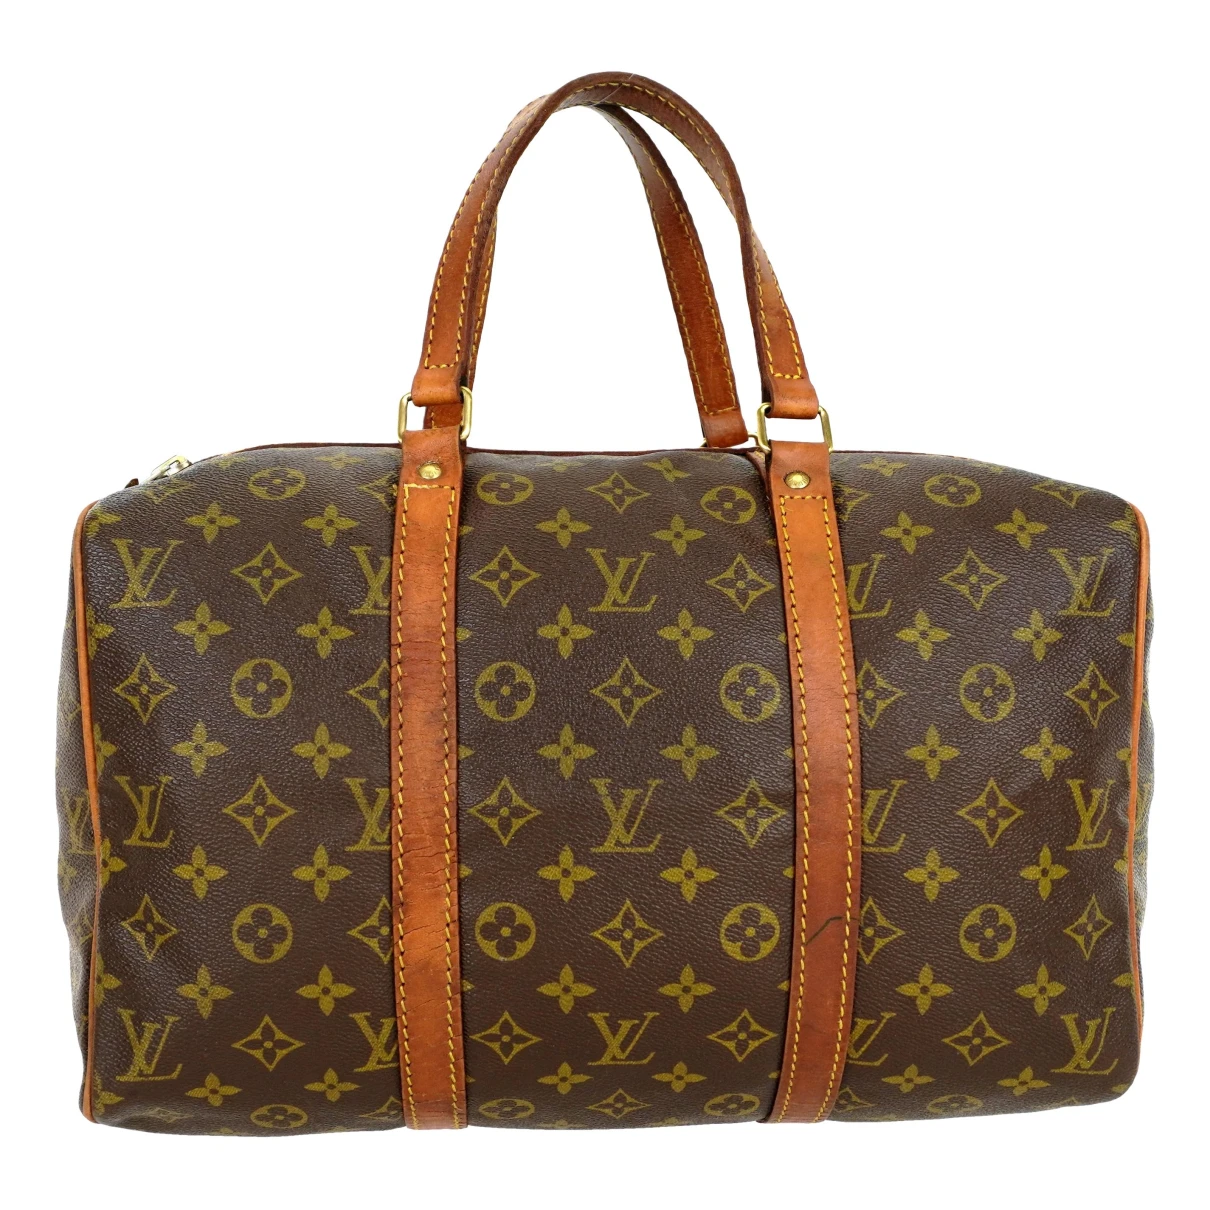 bags Louis Vuitton travel bags Sac souple for Female Leather. Used condition